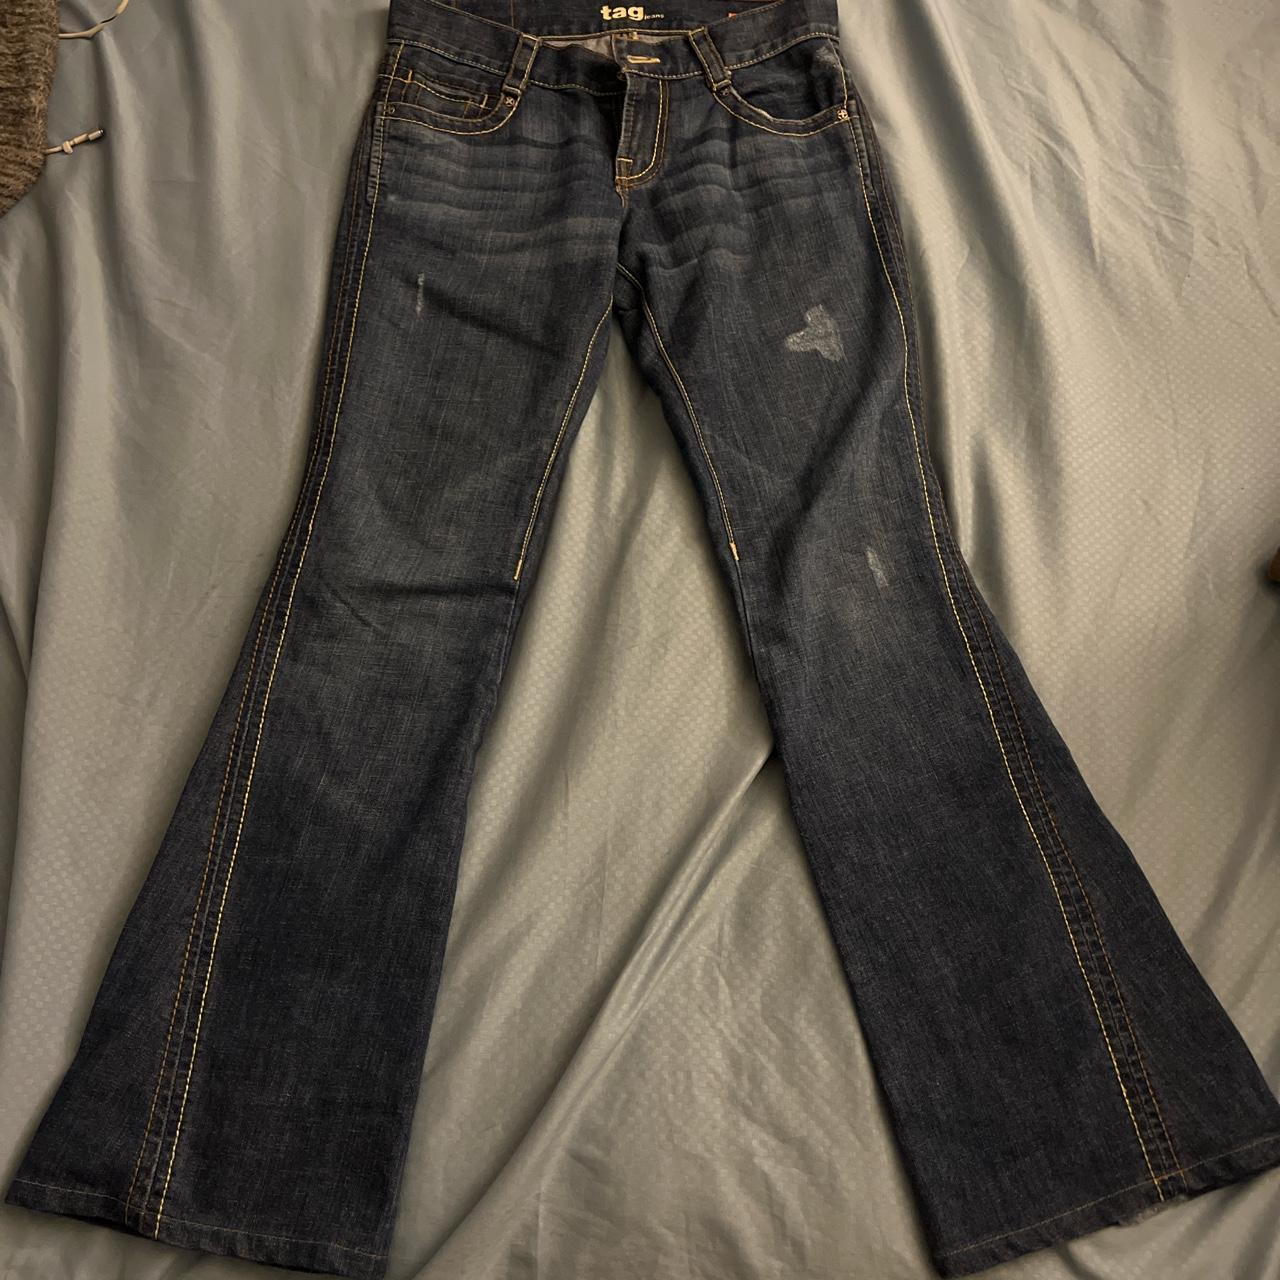 TAG Heuer Women's Jeans (3)